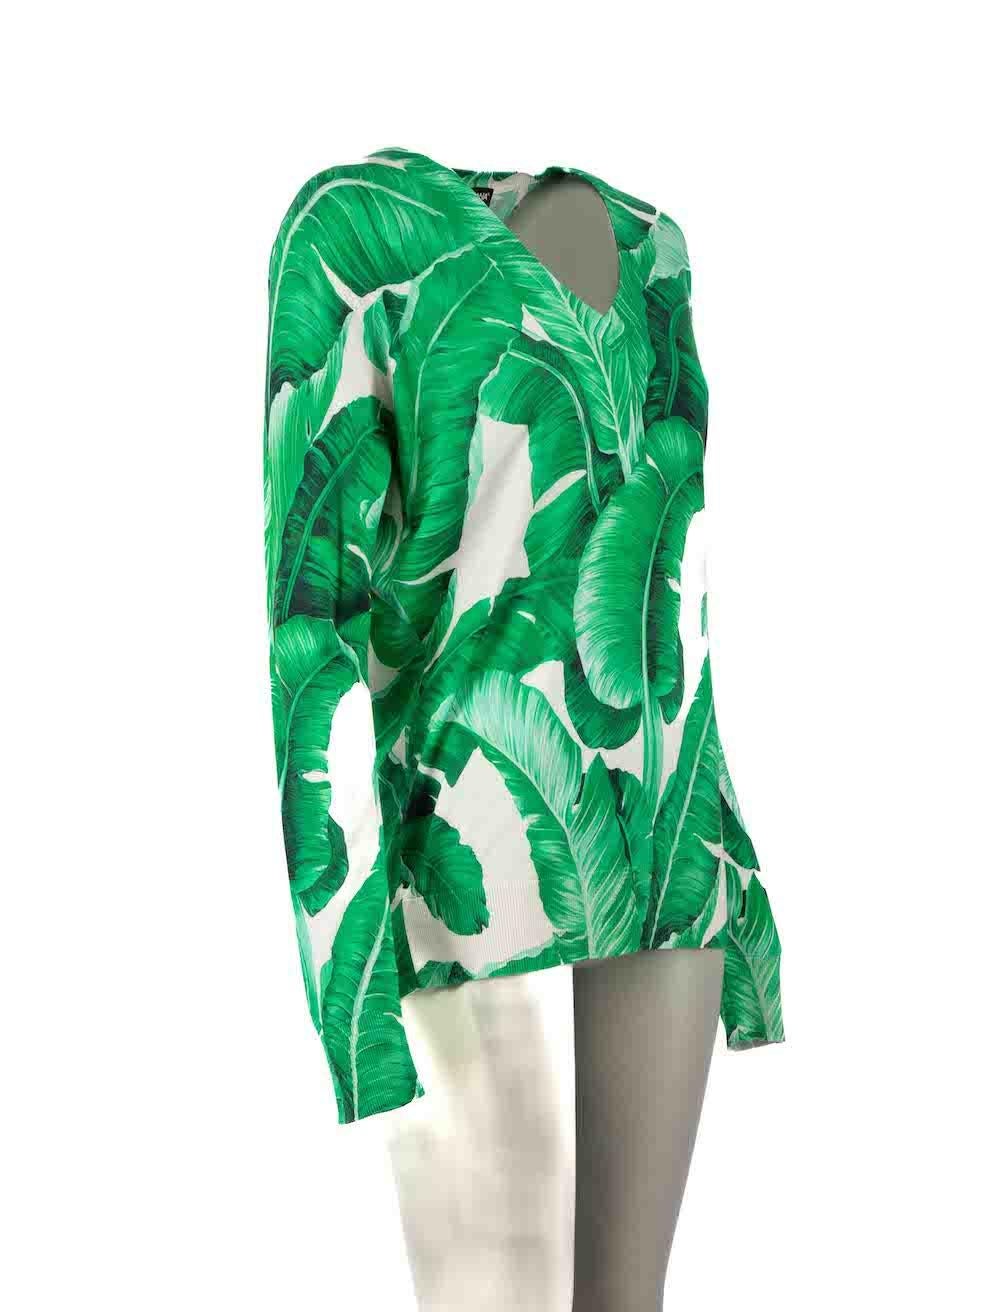 CONDITION is Very good. Hardly any visible wear to jumper is evident on this used Dolce & Gabbana designer resale item.
 
Details
 Green
 Silk
 Long sleeves jumper
 Knitted and stretchy
 Leaf print pattern
 V neckline
 
 Made in Italy

 Composition
